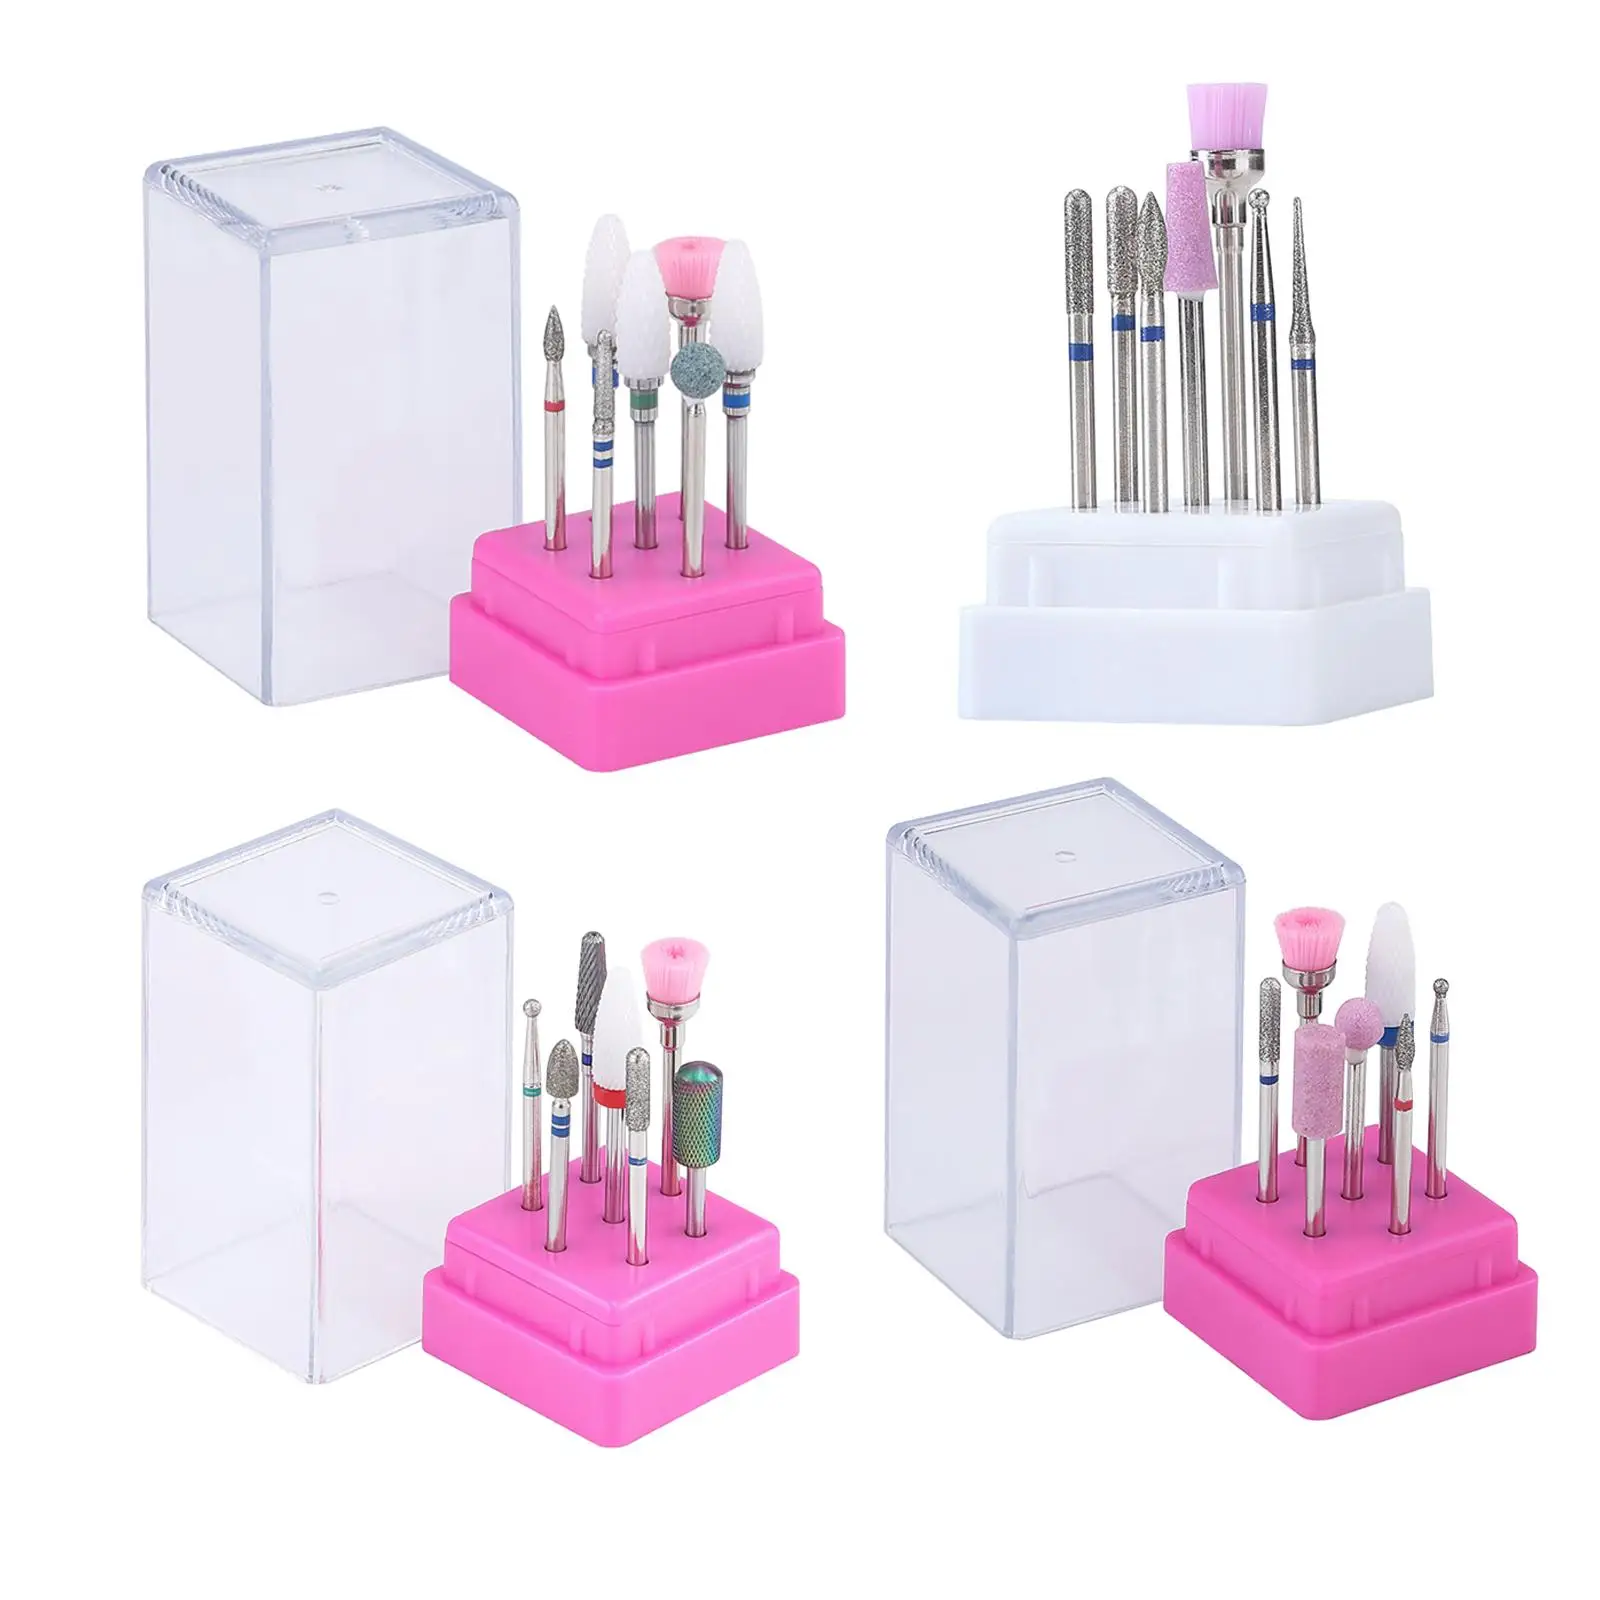 Electric Nail Drill Bits Kit with Holder Box Professional 7x Polishing File Grinding Heads for Sculpt Nail Polish Professionals